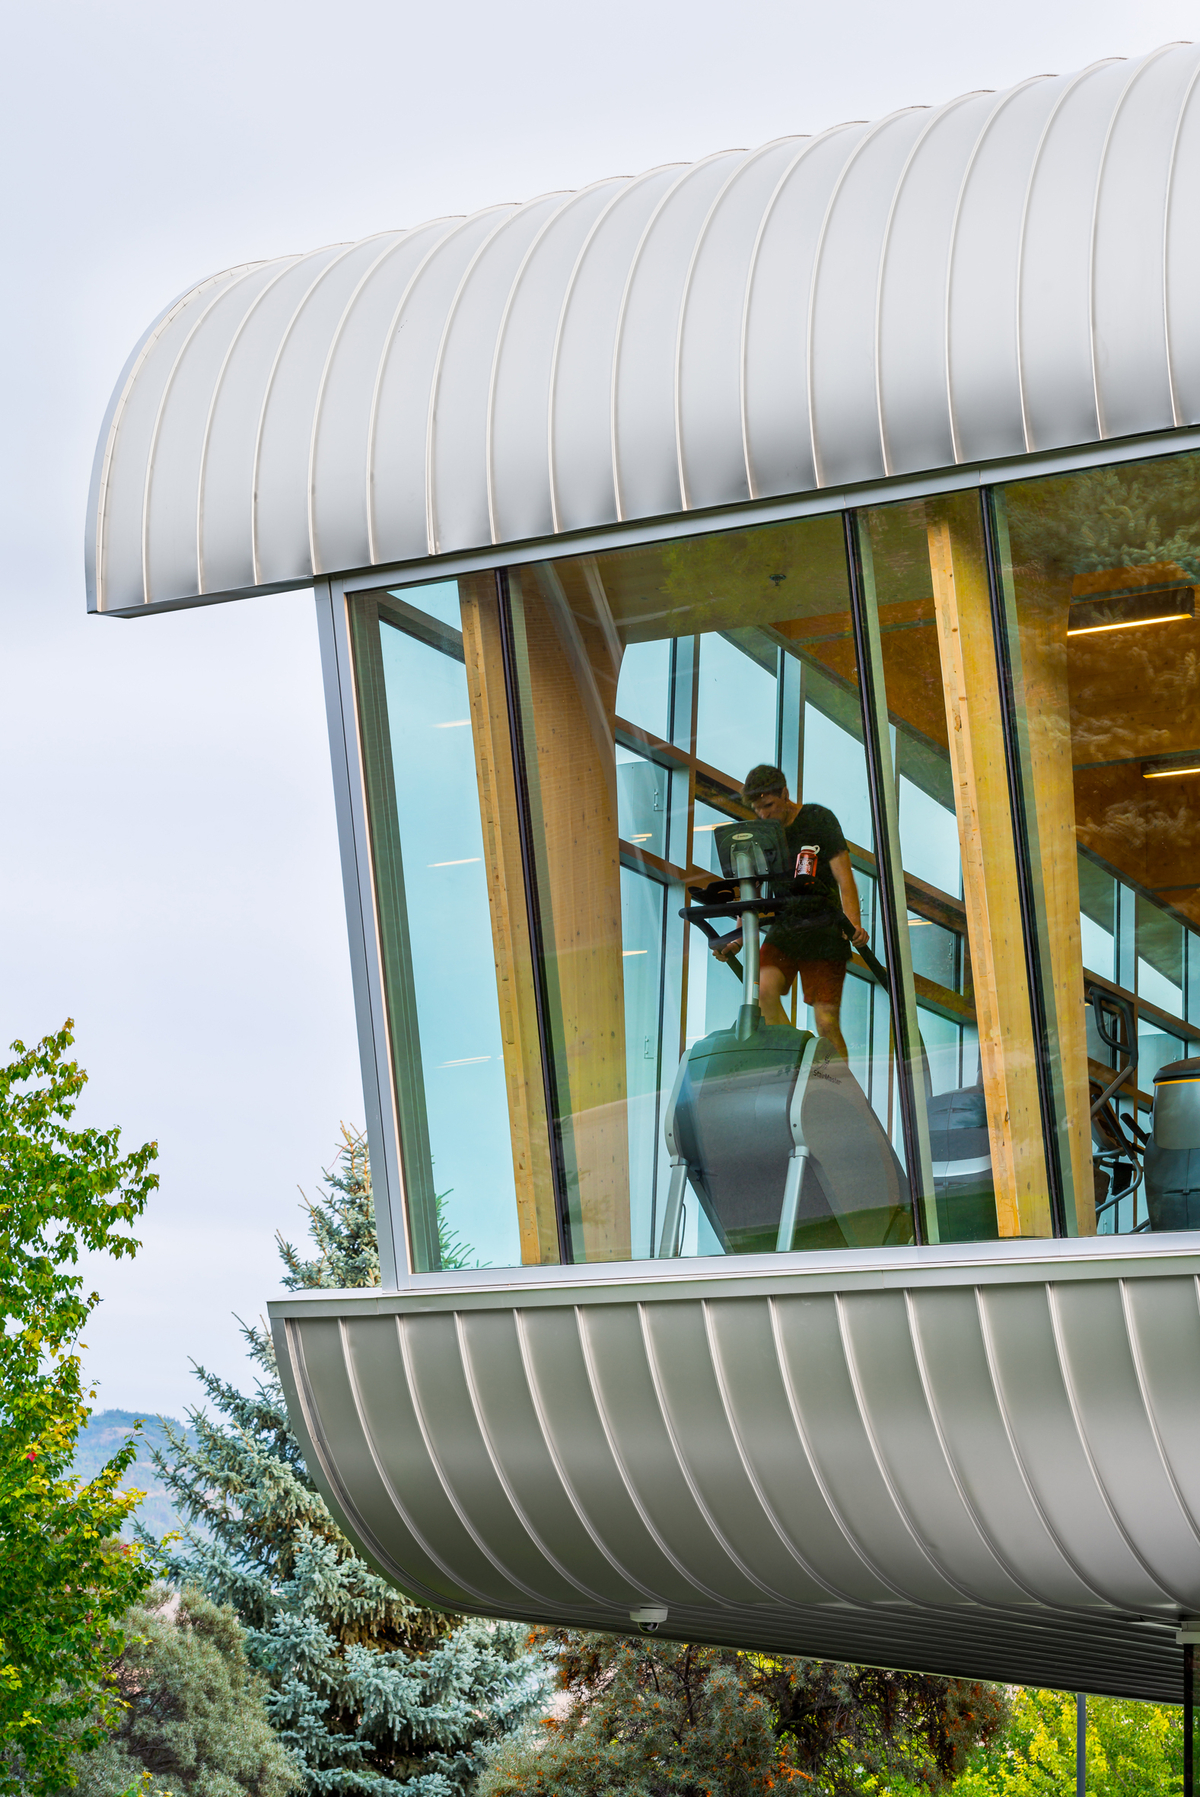 Exterior daytime view of hybrid two-storey UBCO Fitness & Wellness Centre, showing hybrid metal and glazed exterior with cross-laminated timber (CLT) and glue-laminated timber (Glulam) elements inside